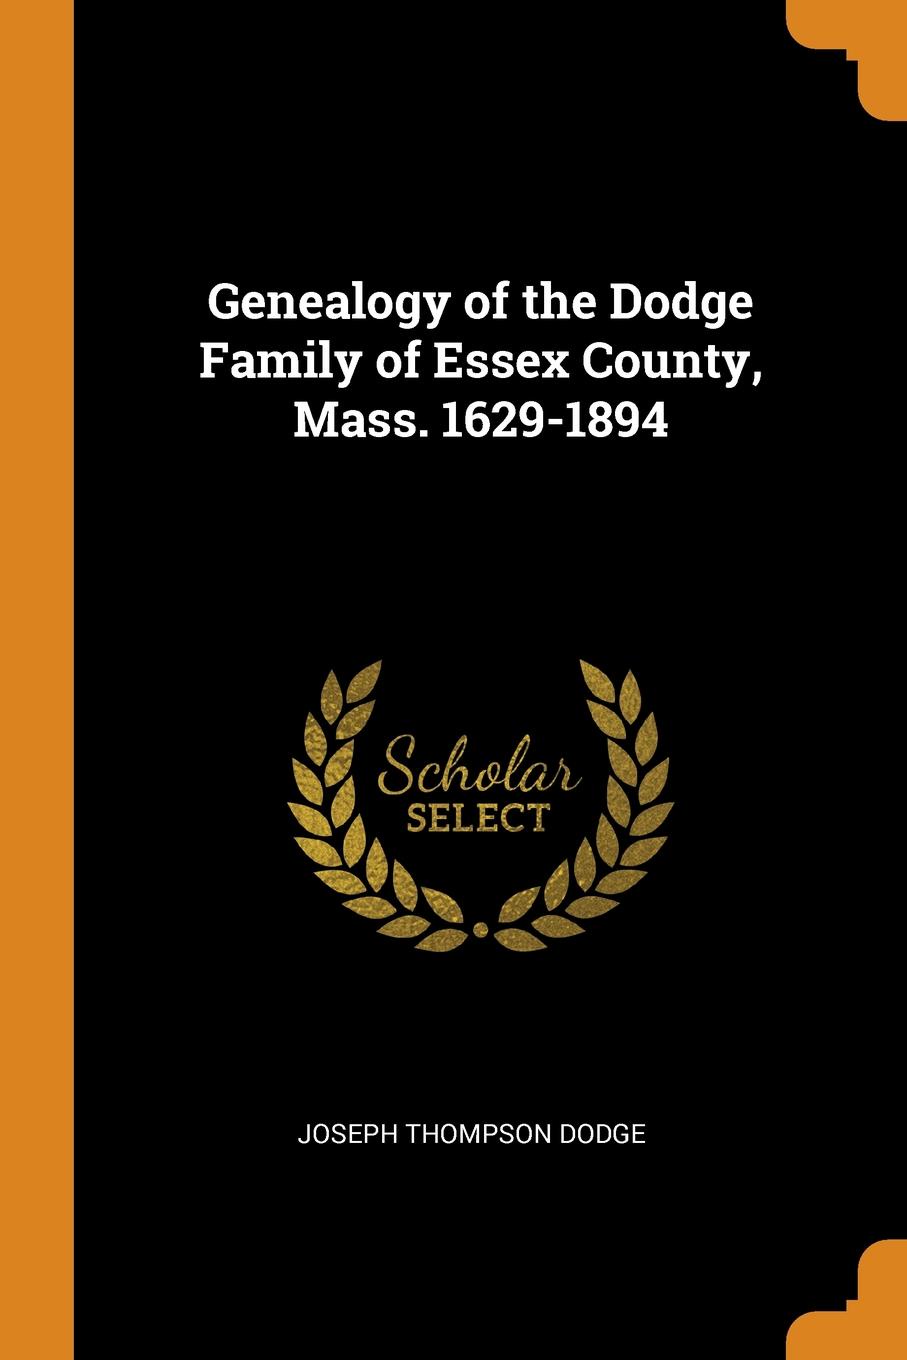 Genealogy of the Dodge Family of Essex County, Mass. 1629-1894